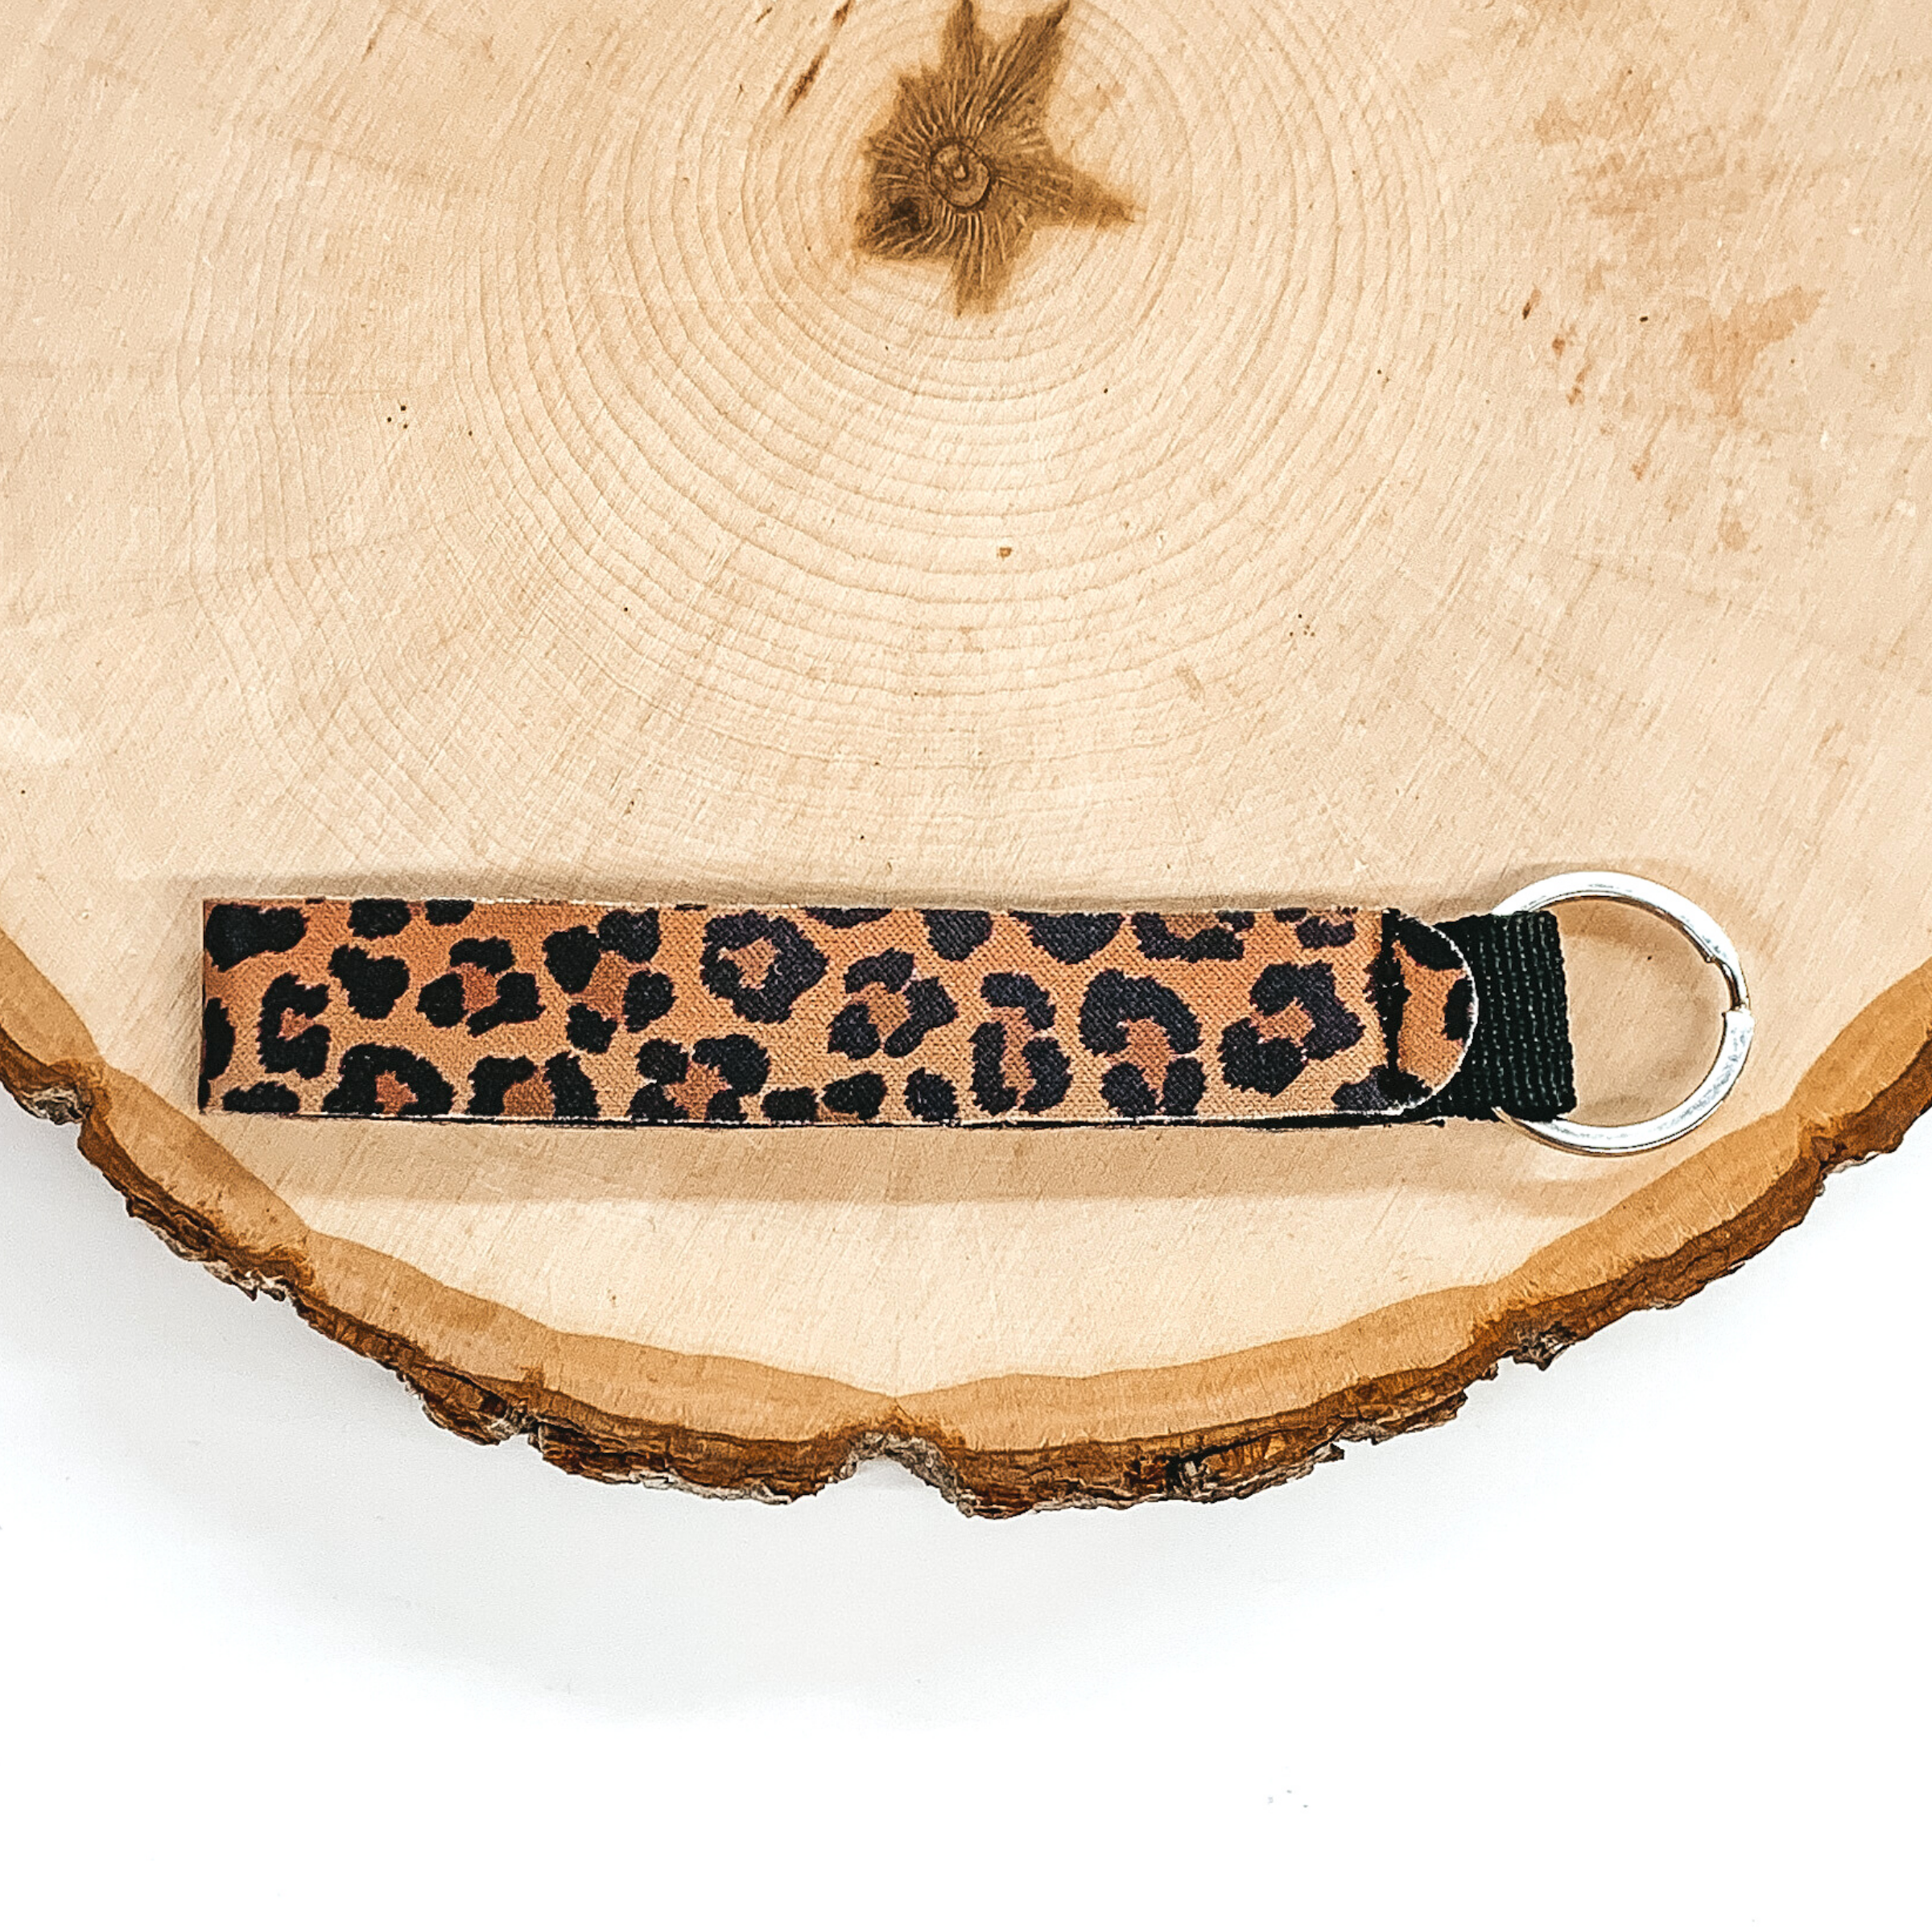 Leopard print bracelet with an attached silver key ring. This item is pictured on a piece of wood on a white background. 